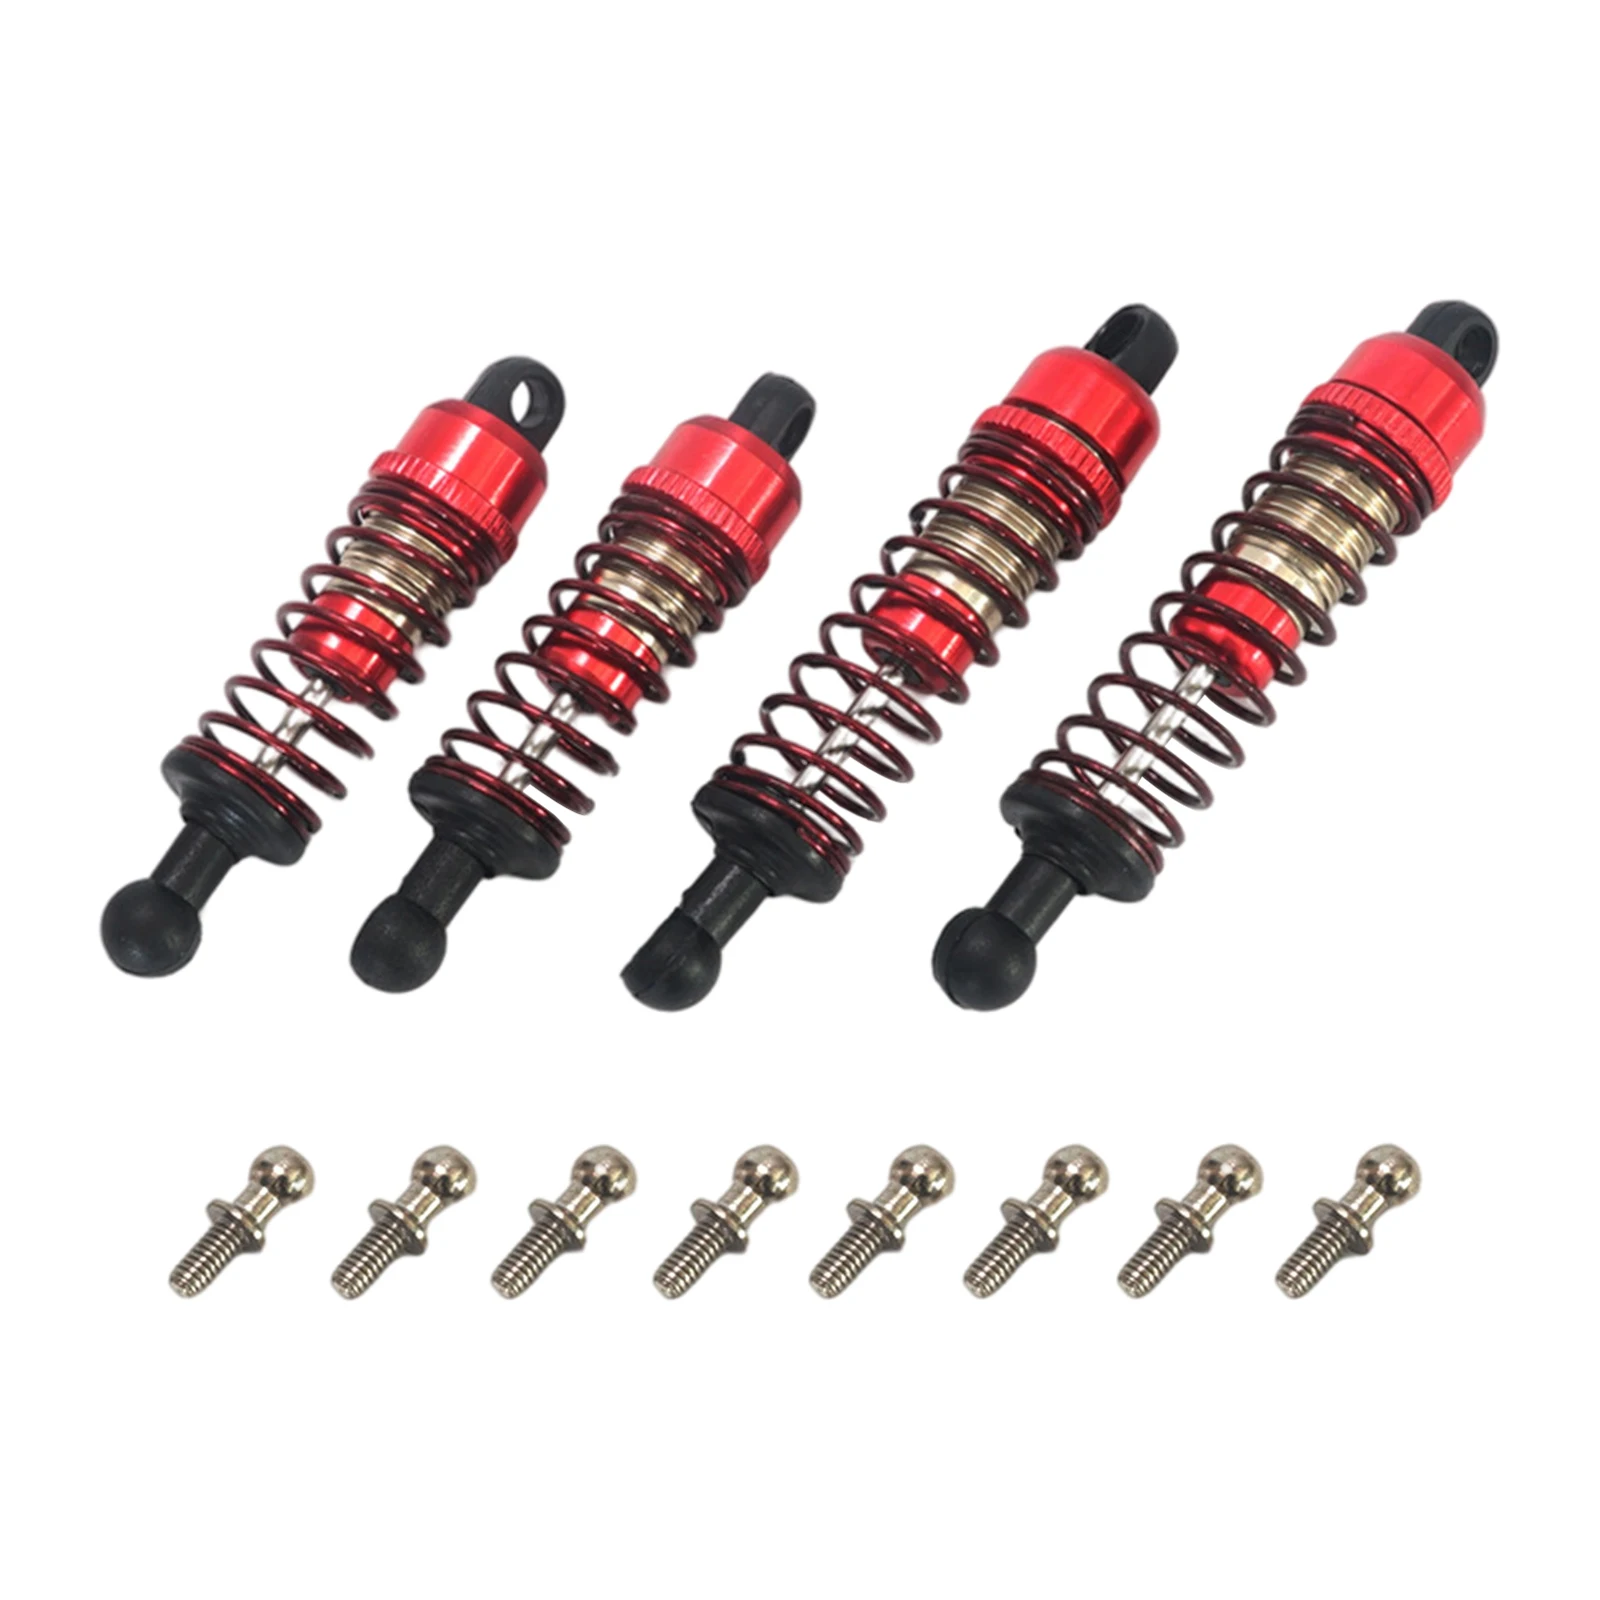 4Pcs Metal Shock Absorber for SG1603 RC Crawler Spare Parts